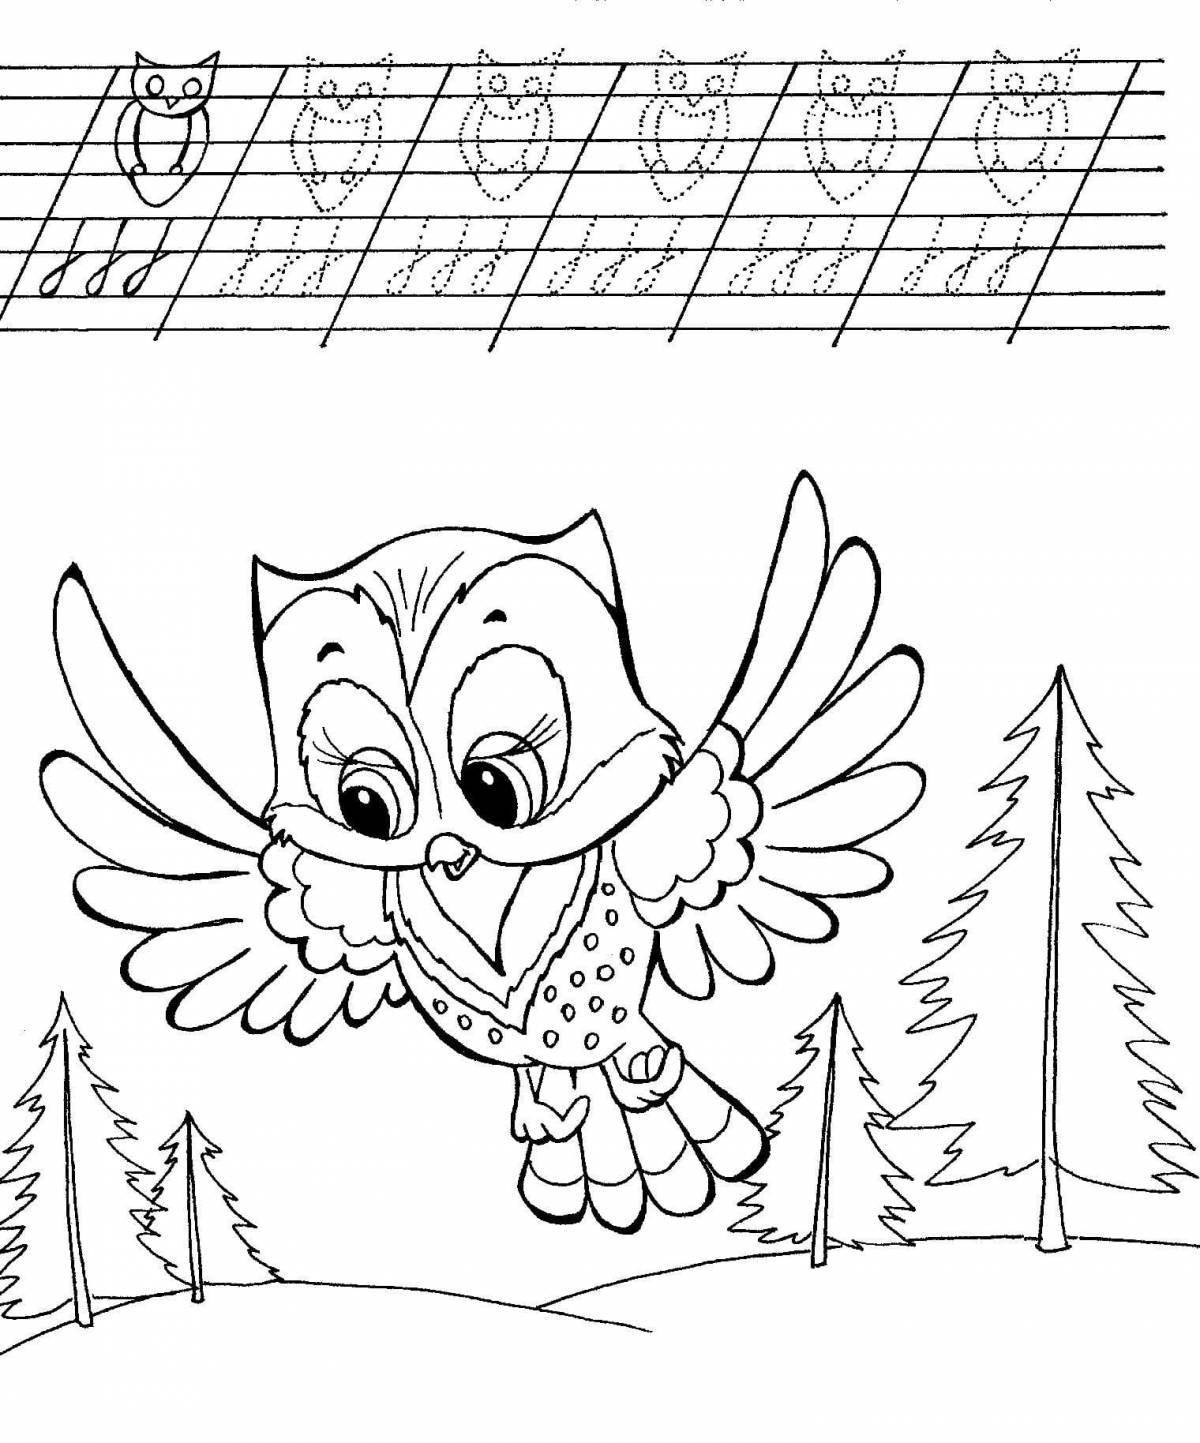 Smart educational coloring book for 6-7 year olds